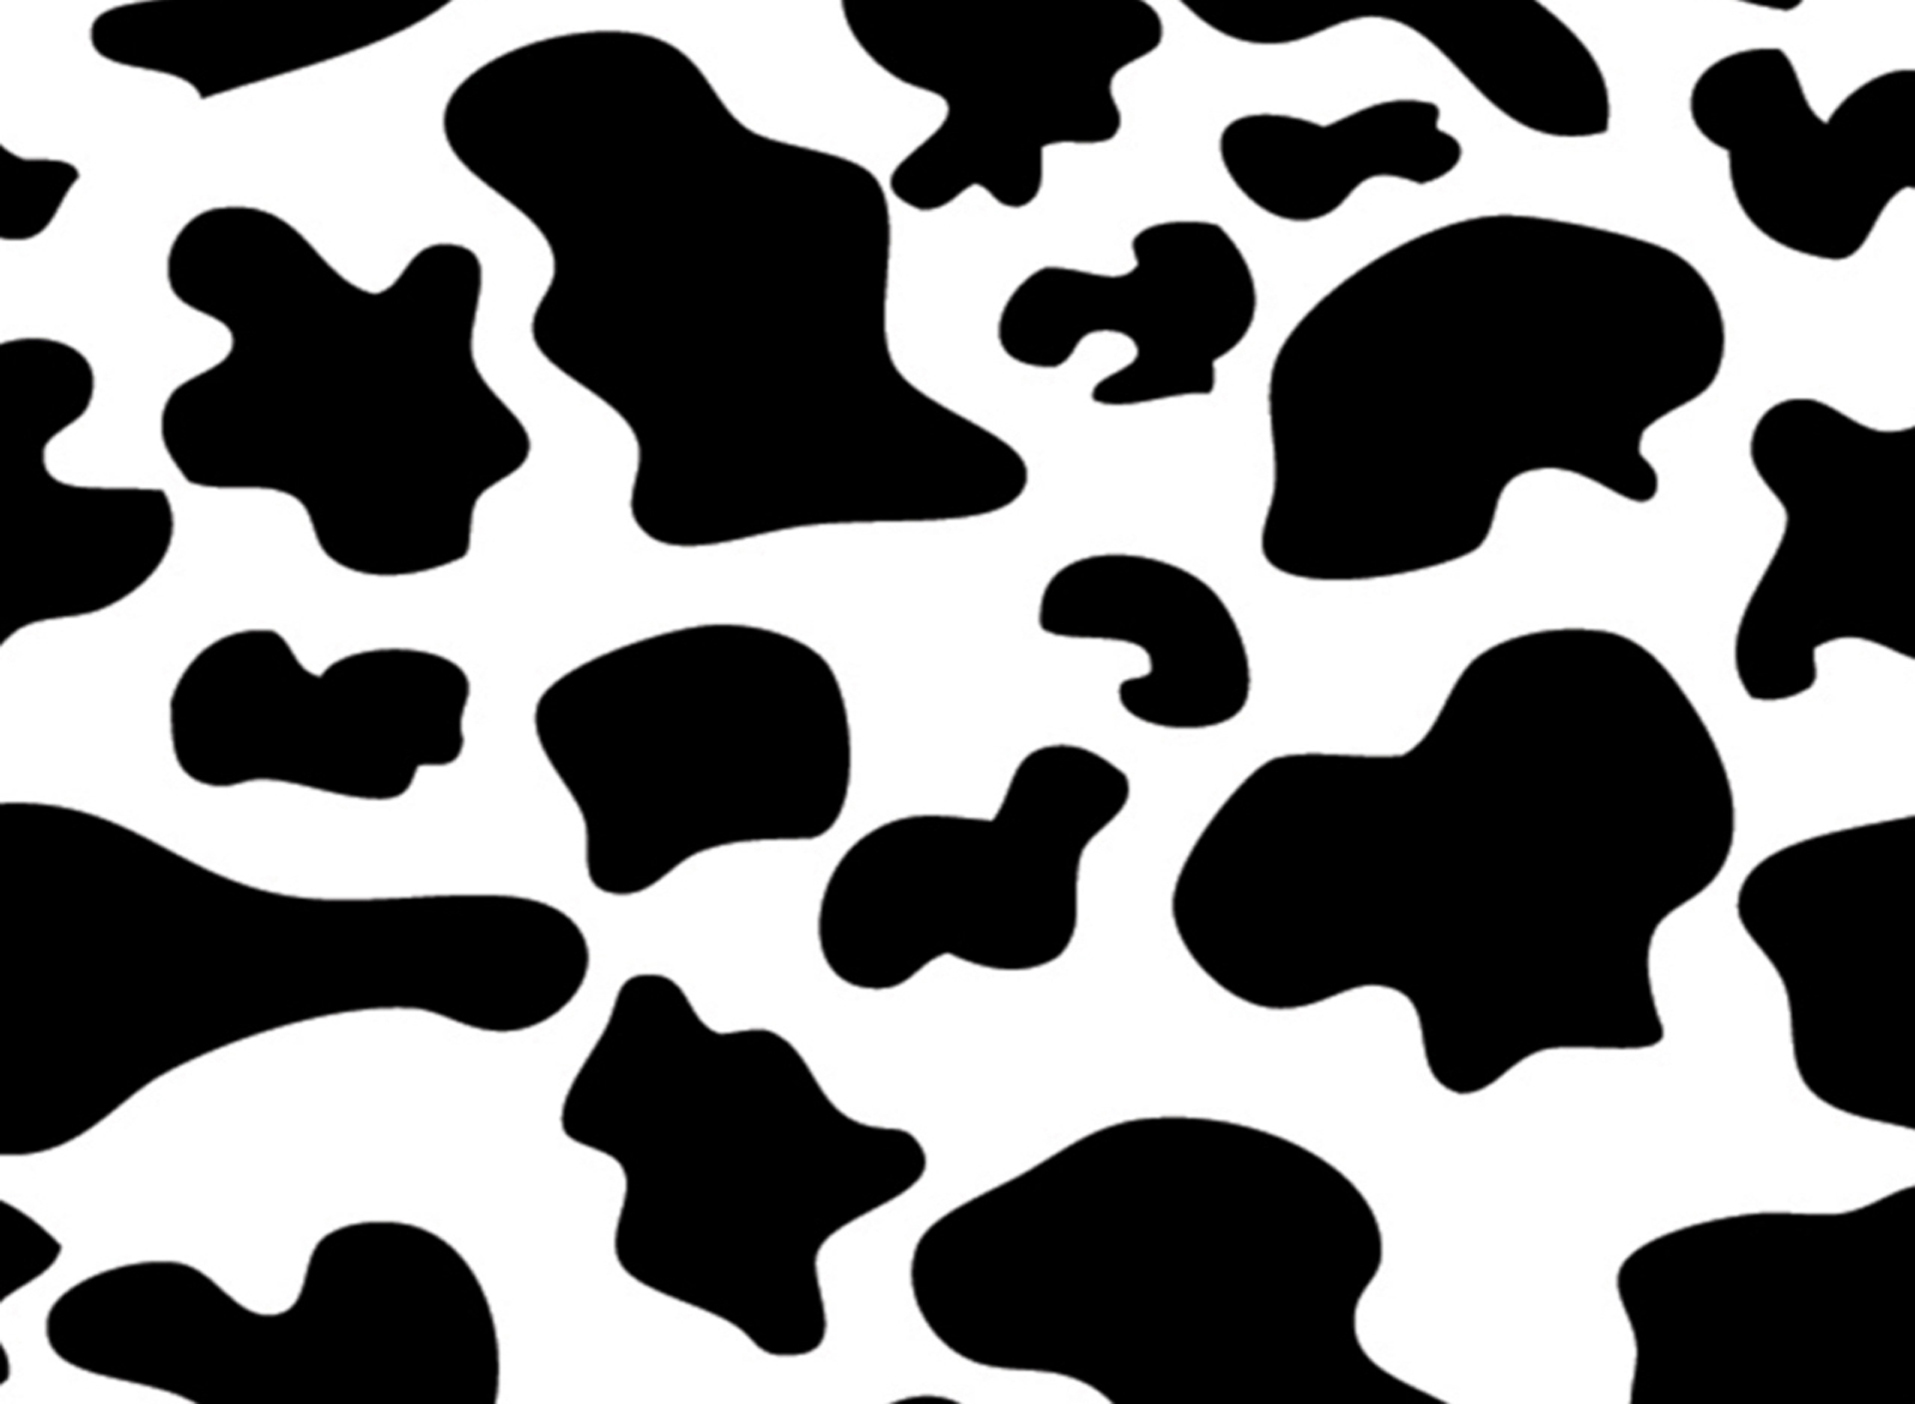 GOOD MOO Cows Lover Aesthetic Cow Print pattern Black and White Cow Skin  Monogram Initial Letter Y Cow Blotchy Pattern Cute Animal Print Design 6 x  9  and Christmas Gifts With